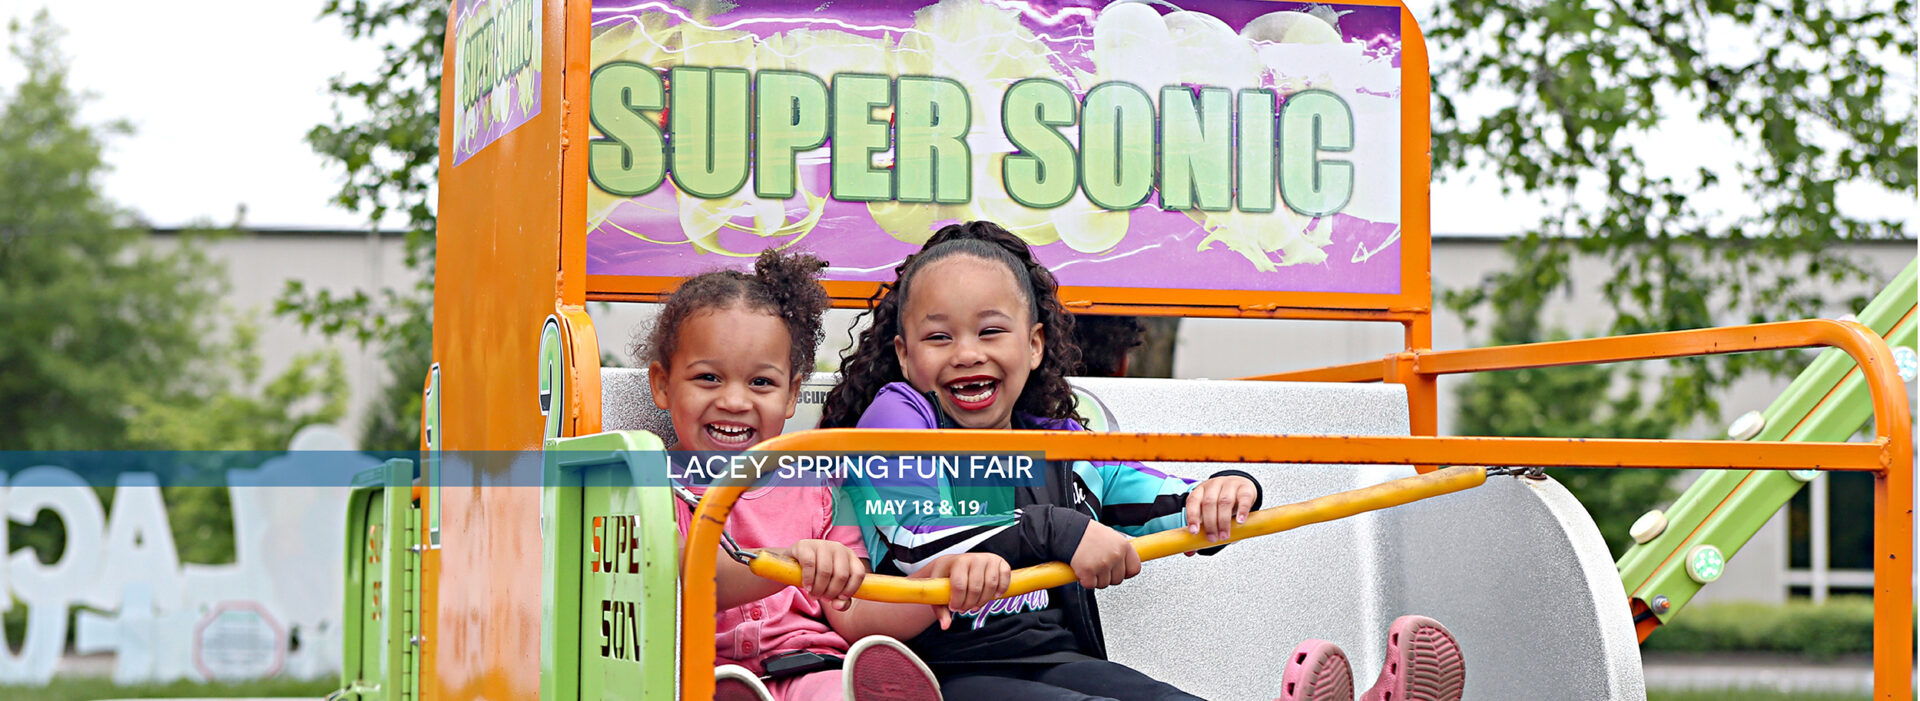 Two children enjoying a ride at the Lacey Fun Fair - click this image to learn more about the event